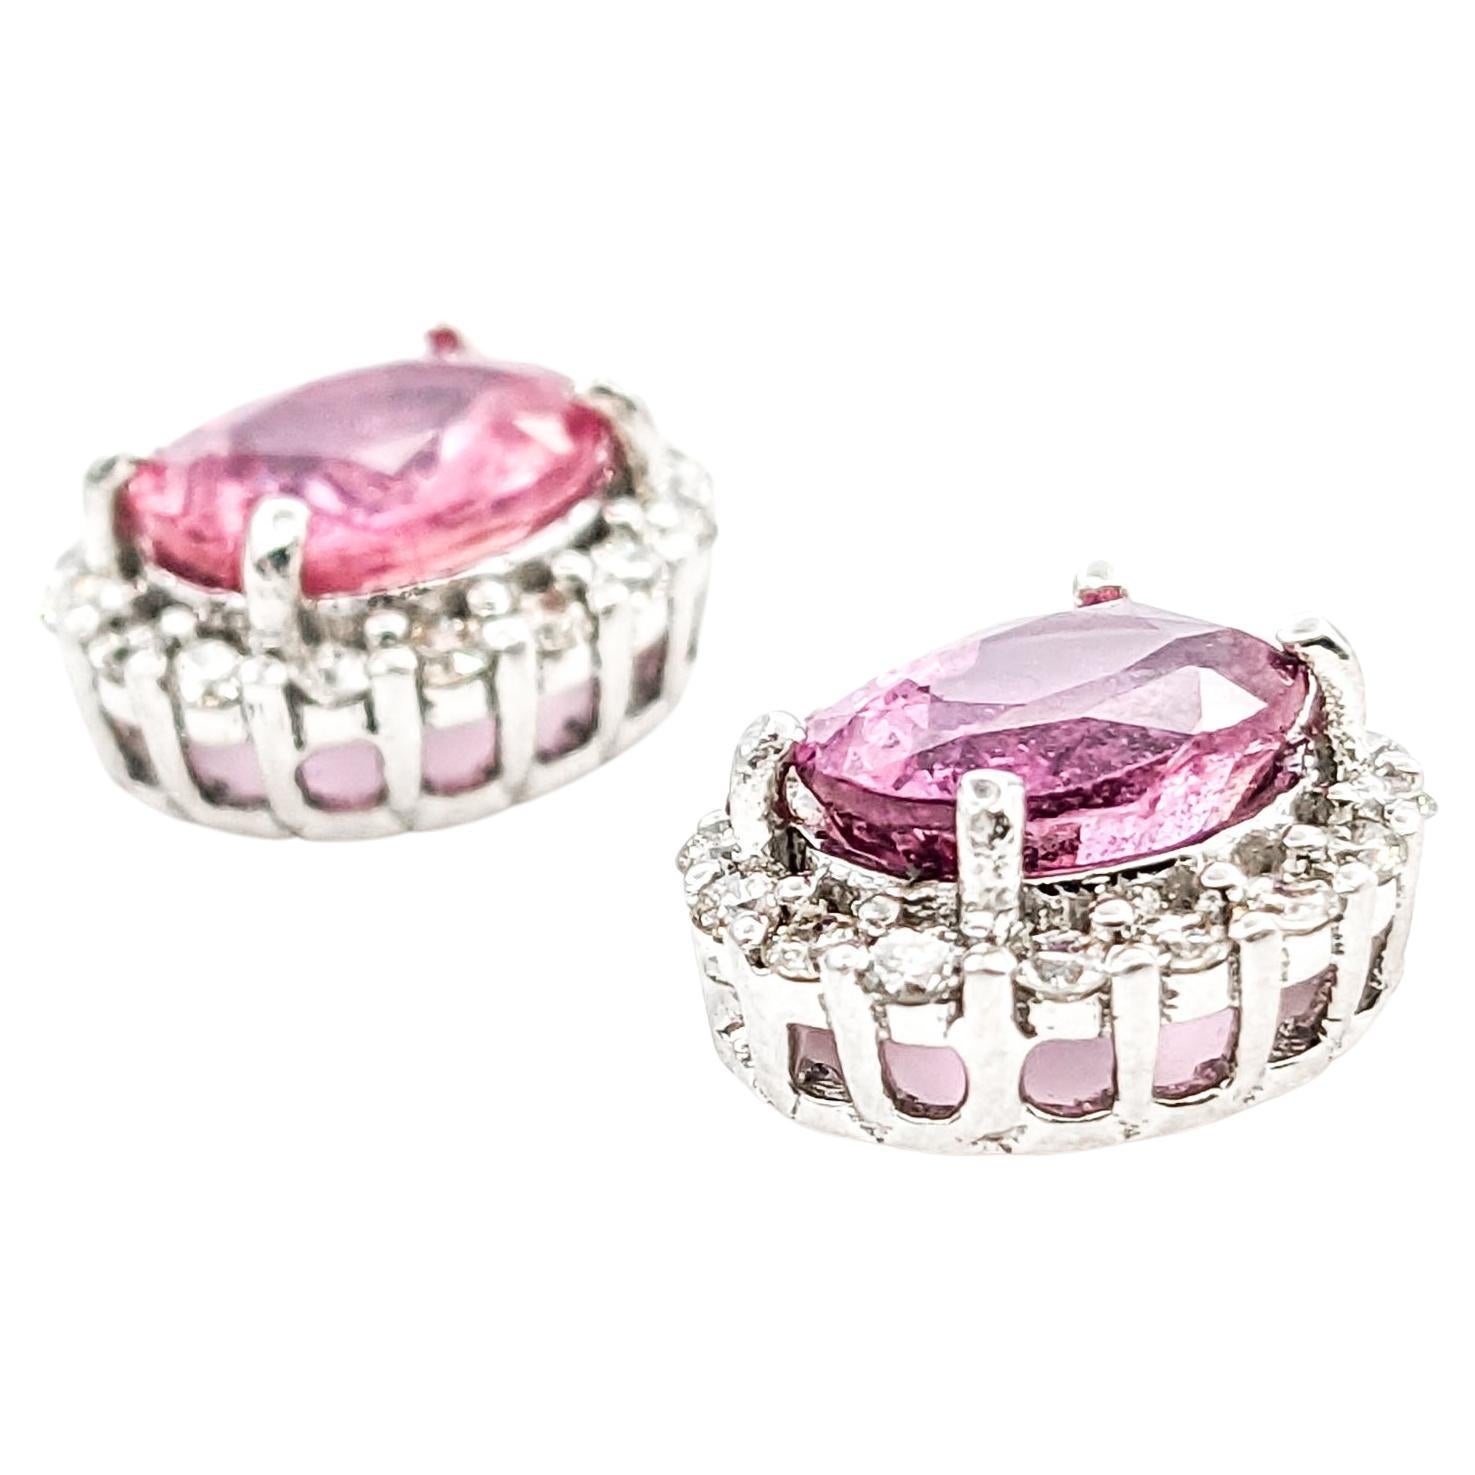 2.49ctw Pink Sapphires & Diamonds Stud Earring In White Gold


These stunning earrings are exquisitely crafted in 18kt white gold, showcasing 0.40ctw diamonds with SI clarity and a near colorless hue, elegantly paired with 2.49ctw pink sapphires.